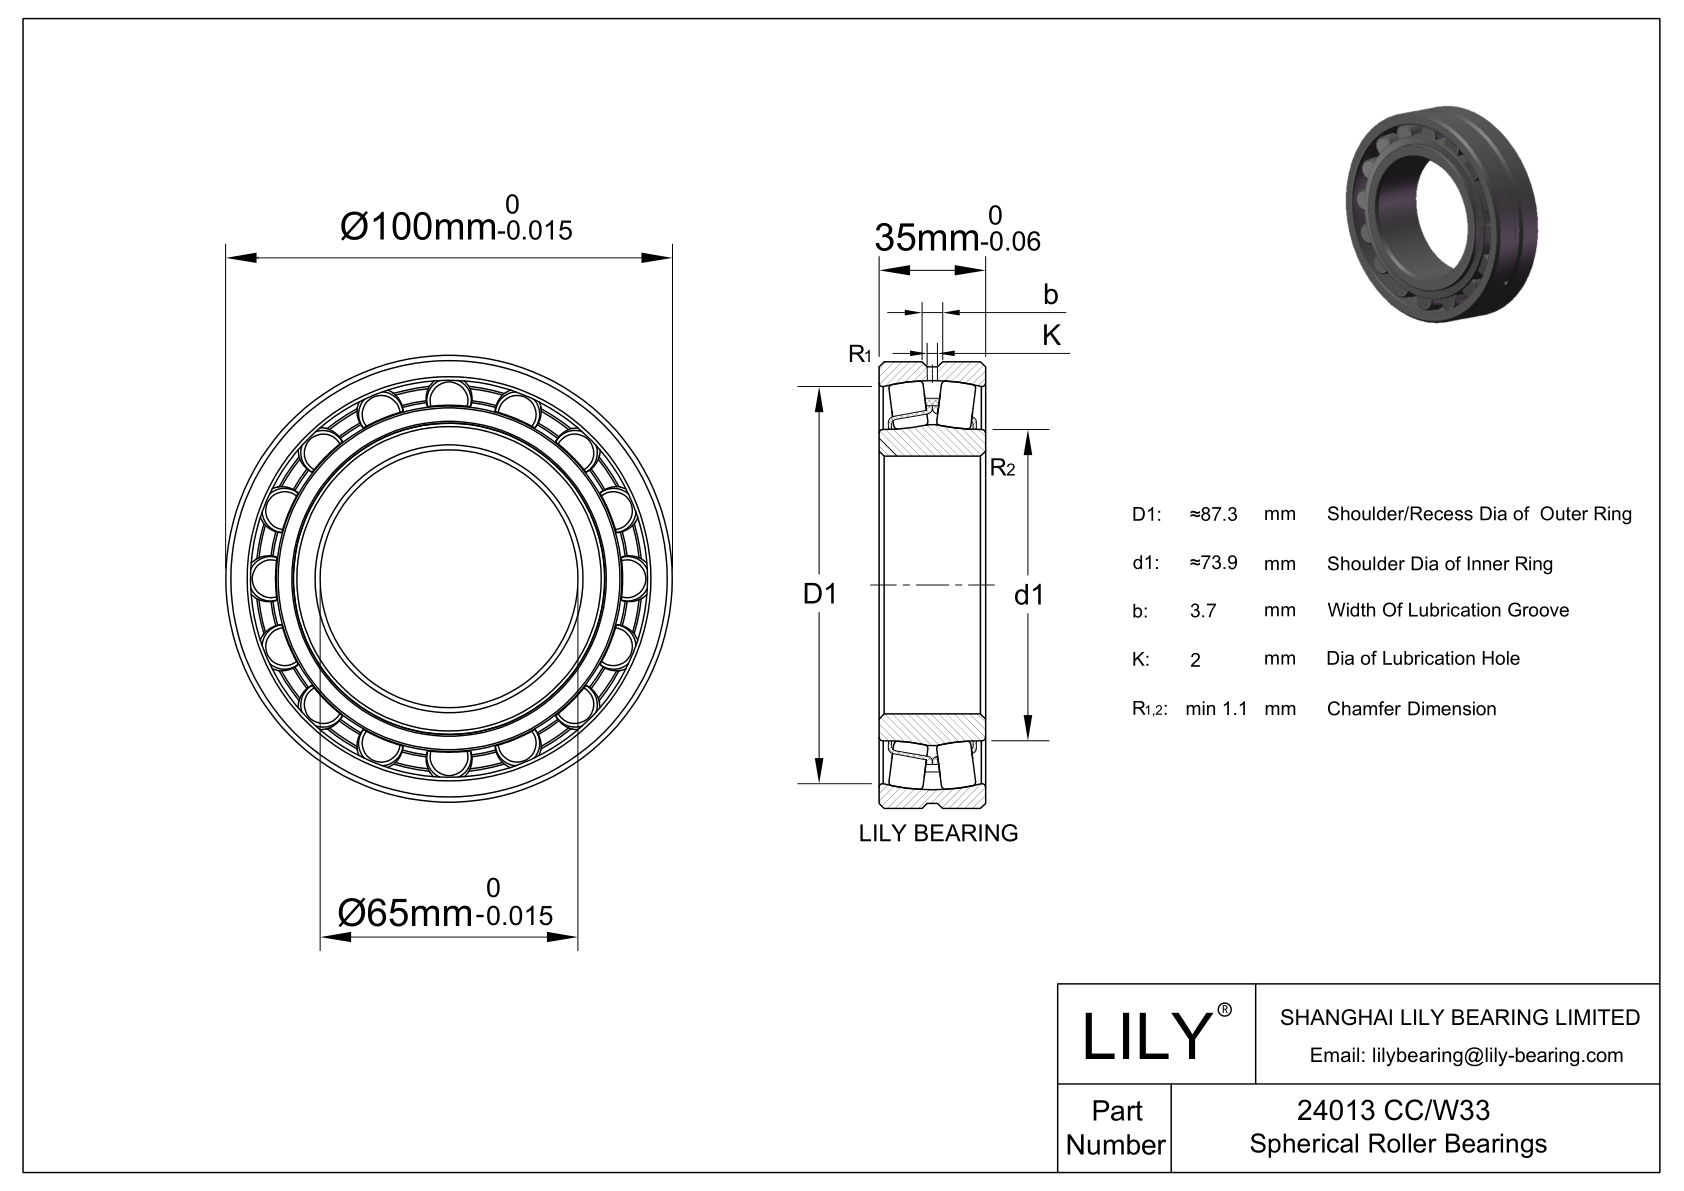 24013 CC/W33 Double Row Spherical Roller Bearing cad drawing